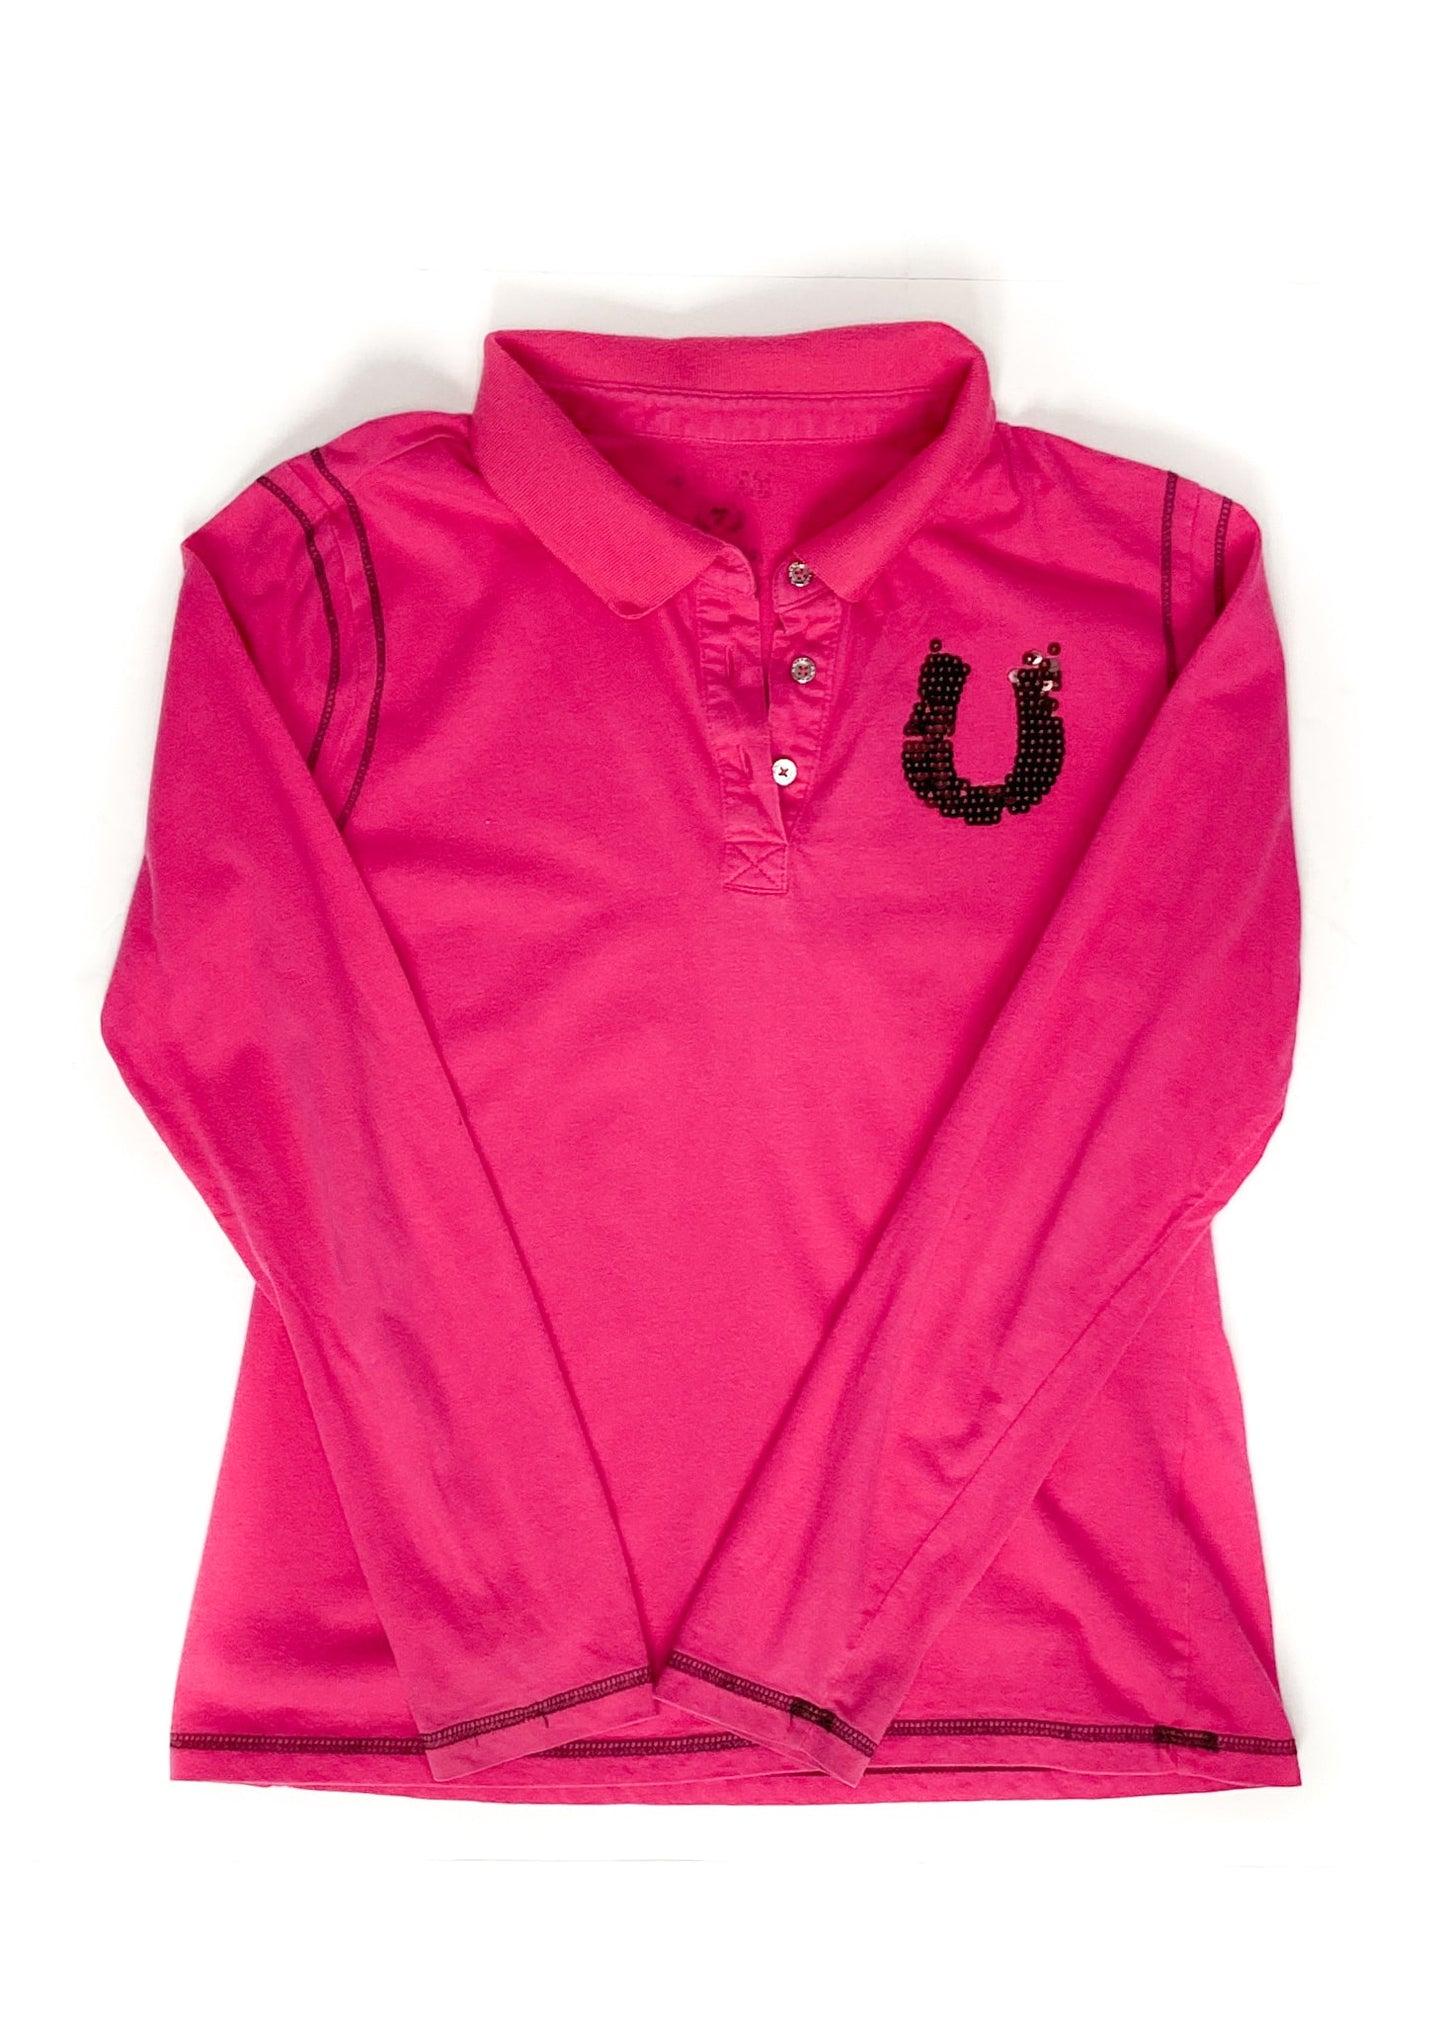 Ariat Long Sleeve Polo Shirt - Pink - Youth XL